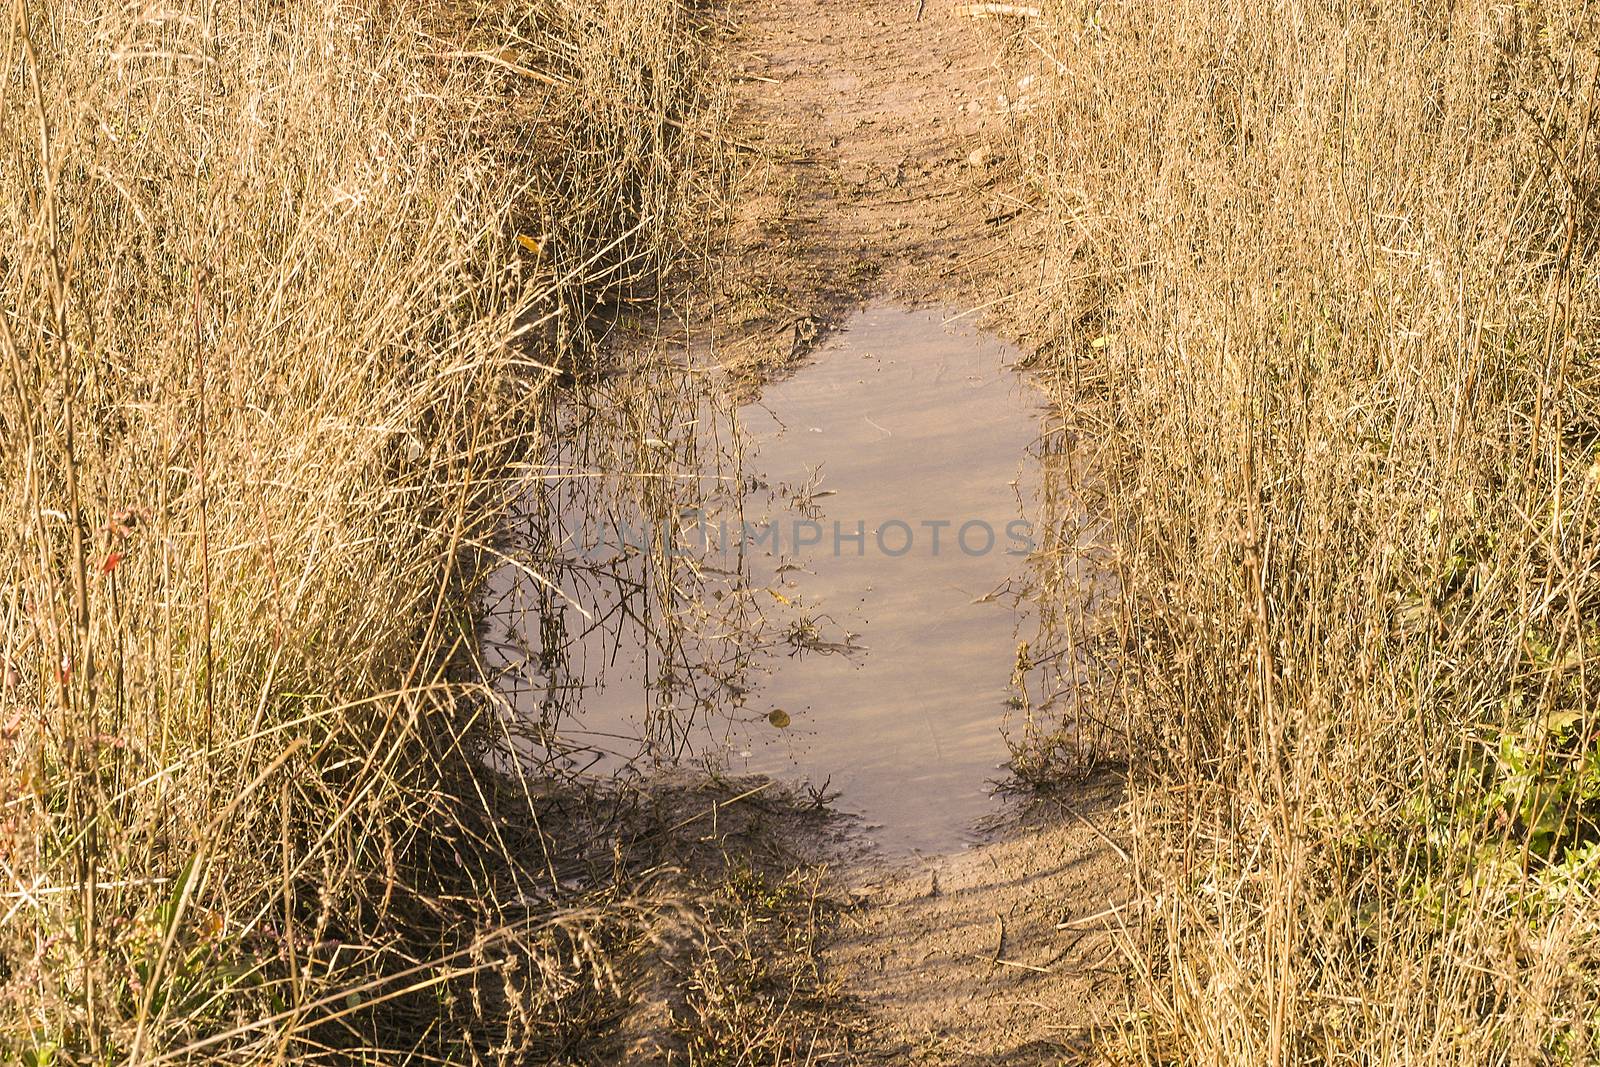 The scenery with the Pathway throw the field with weed grasses grown and mud puddle at a rural locality